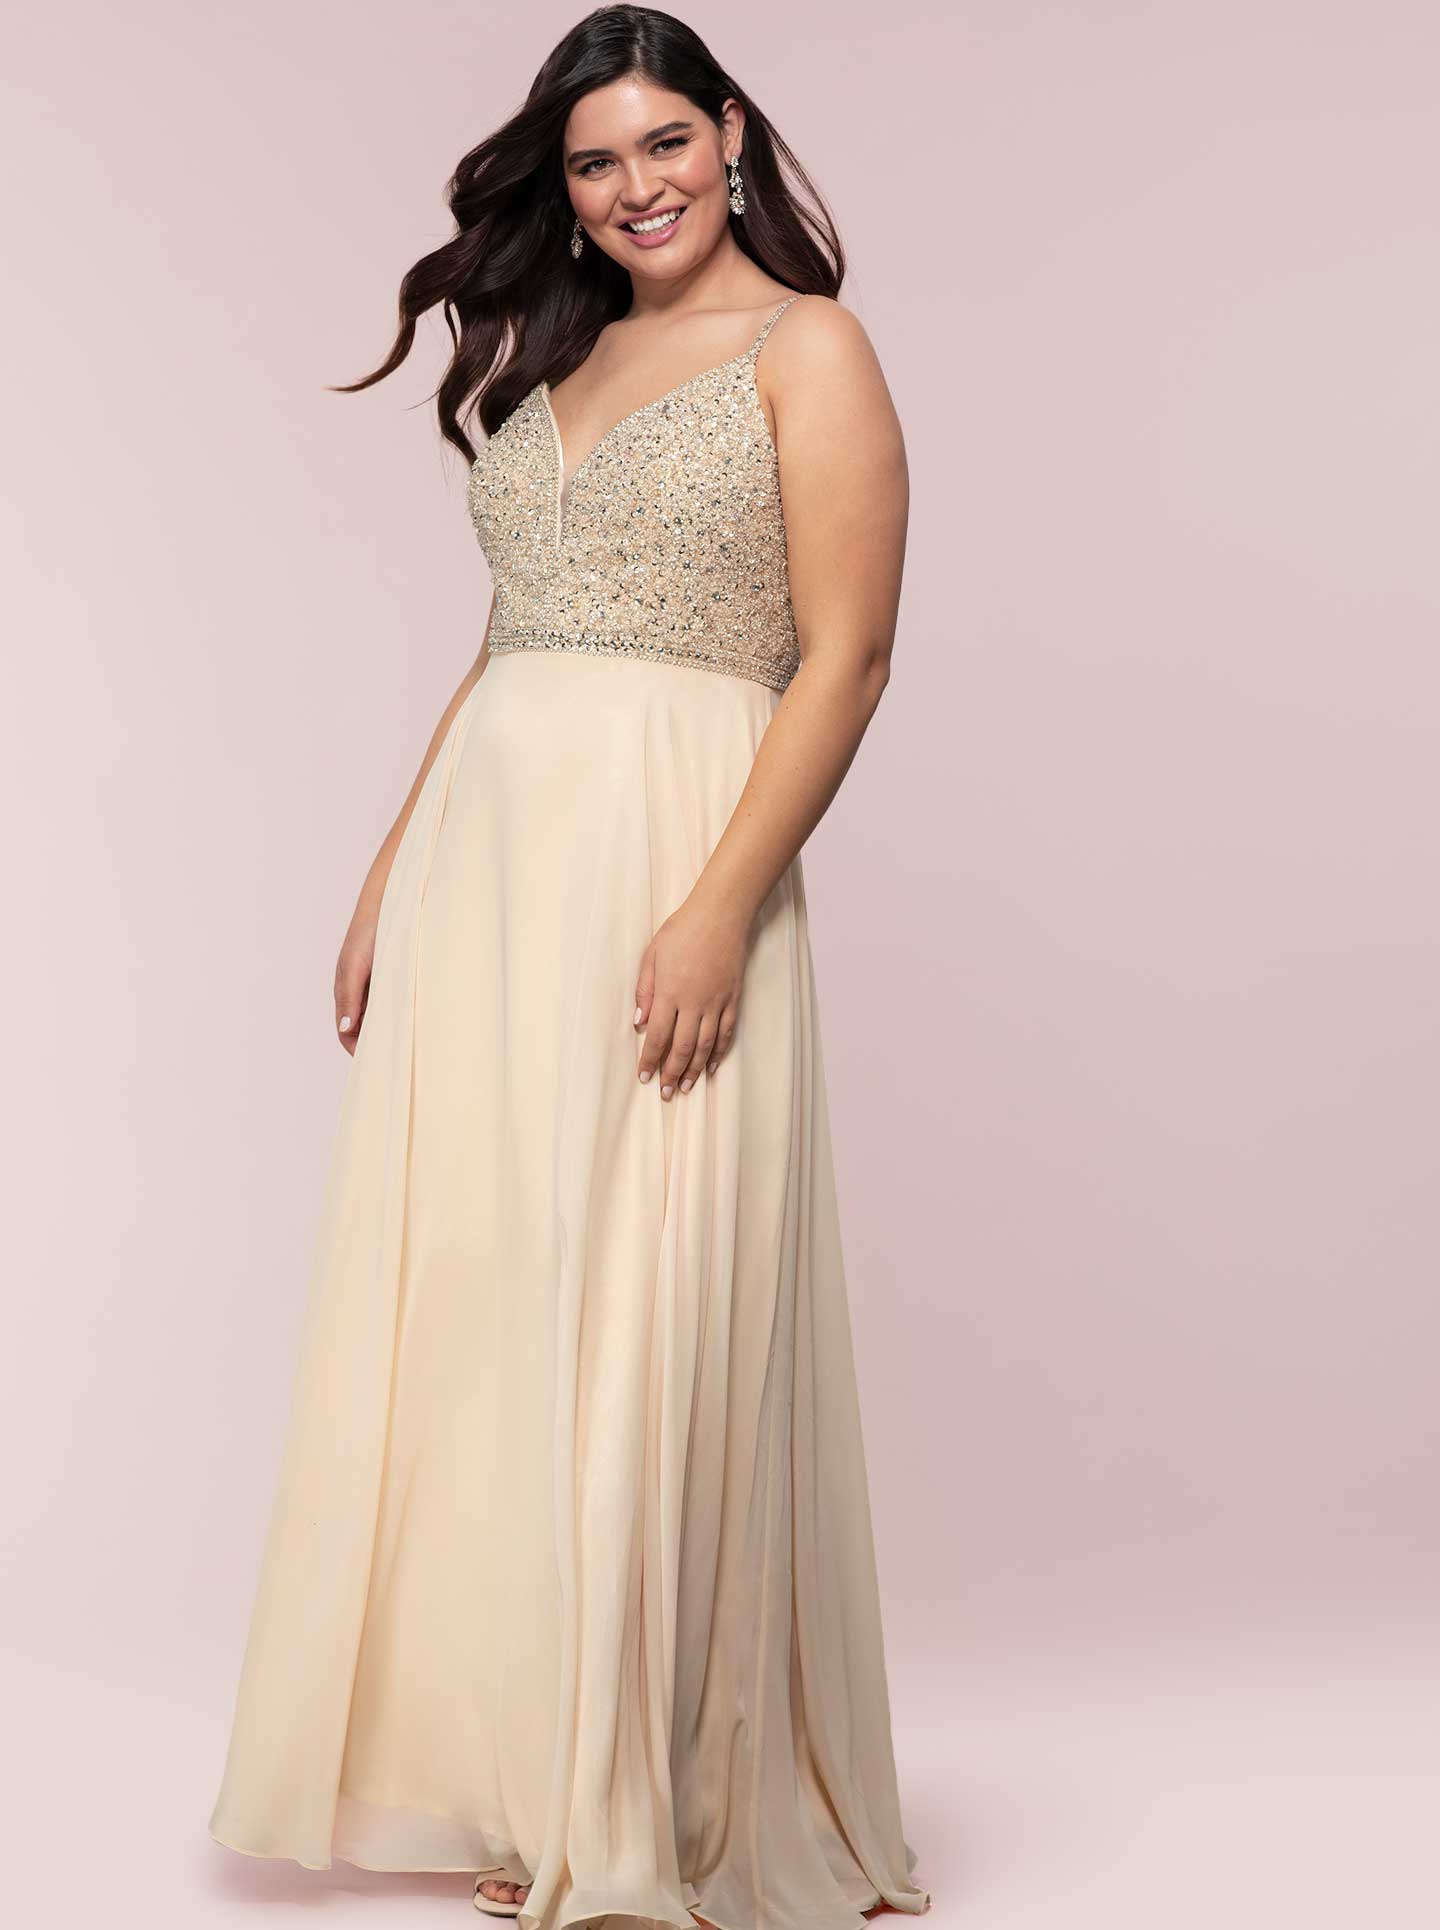 How Prom Dress Styles Affect Sizing and Fit - PromGirl